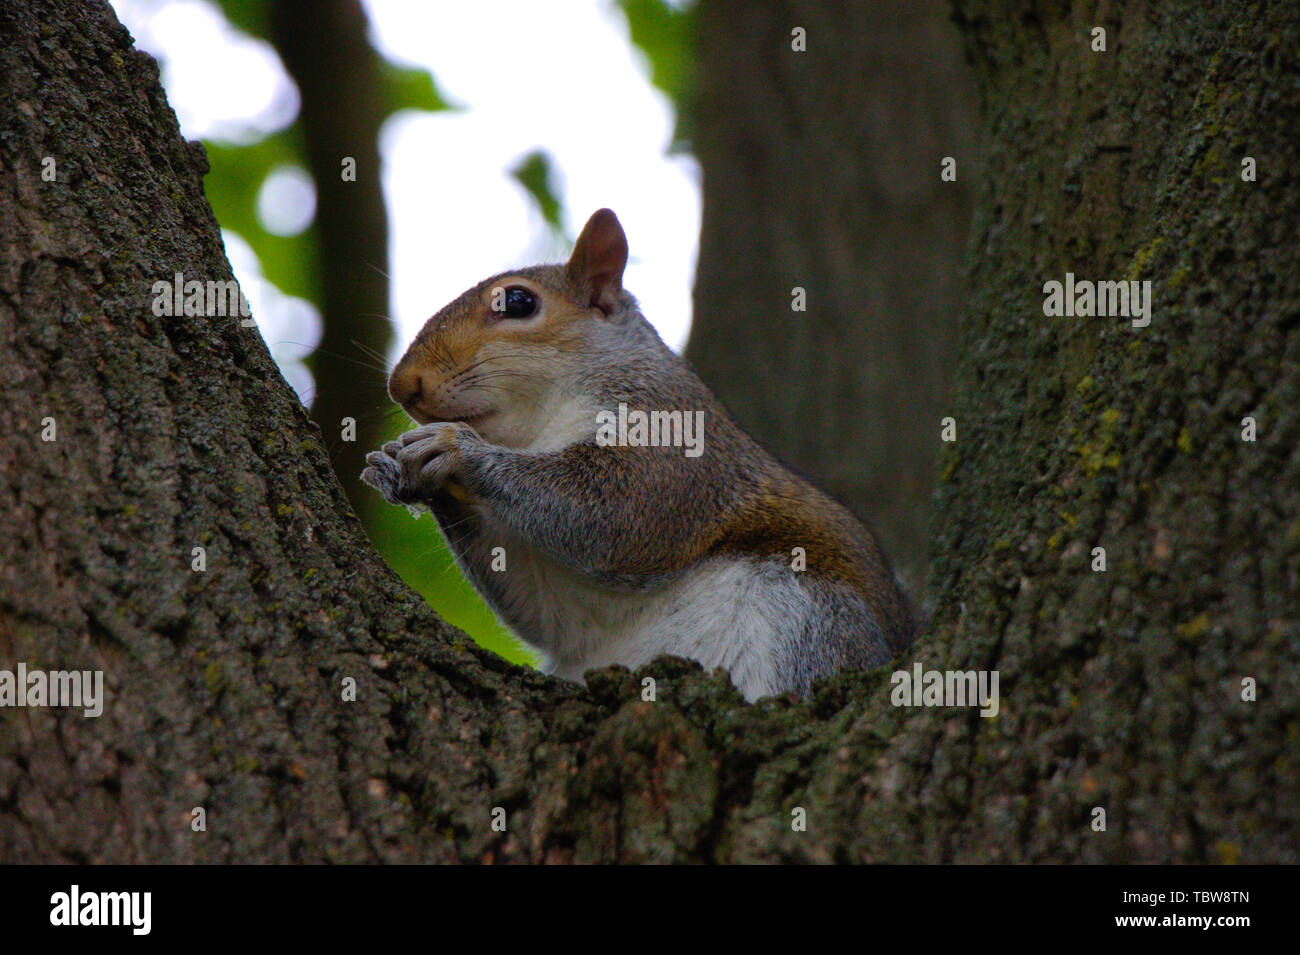 Squirrel sitting on a tree. Hyde park, London. Stock Photo